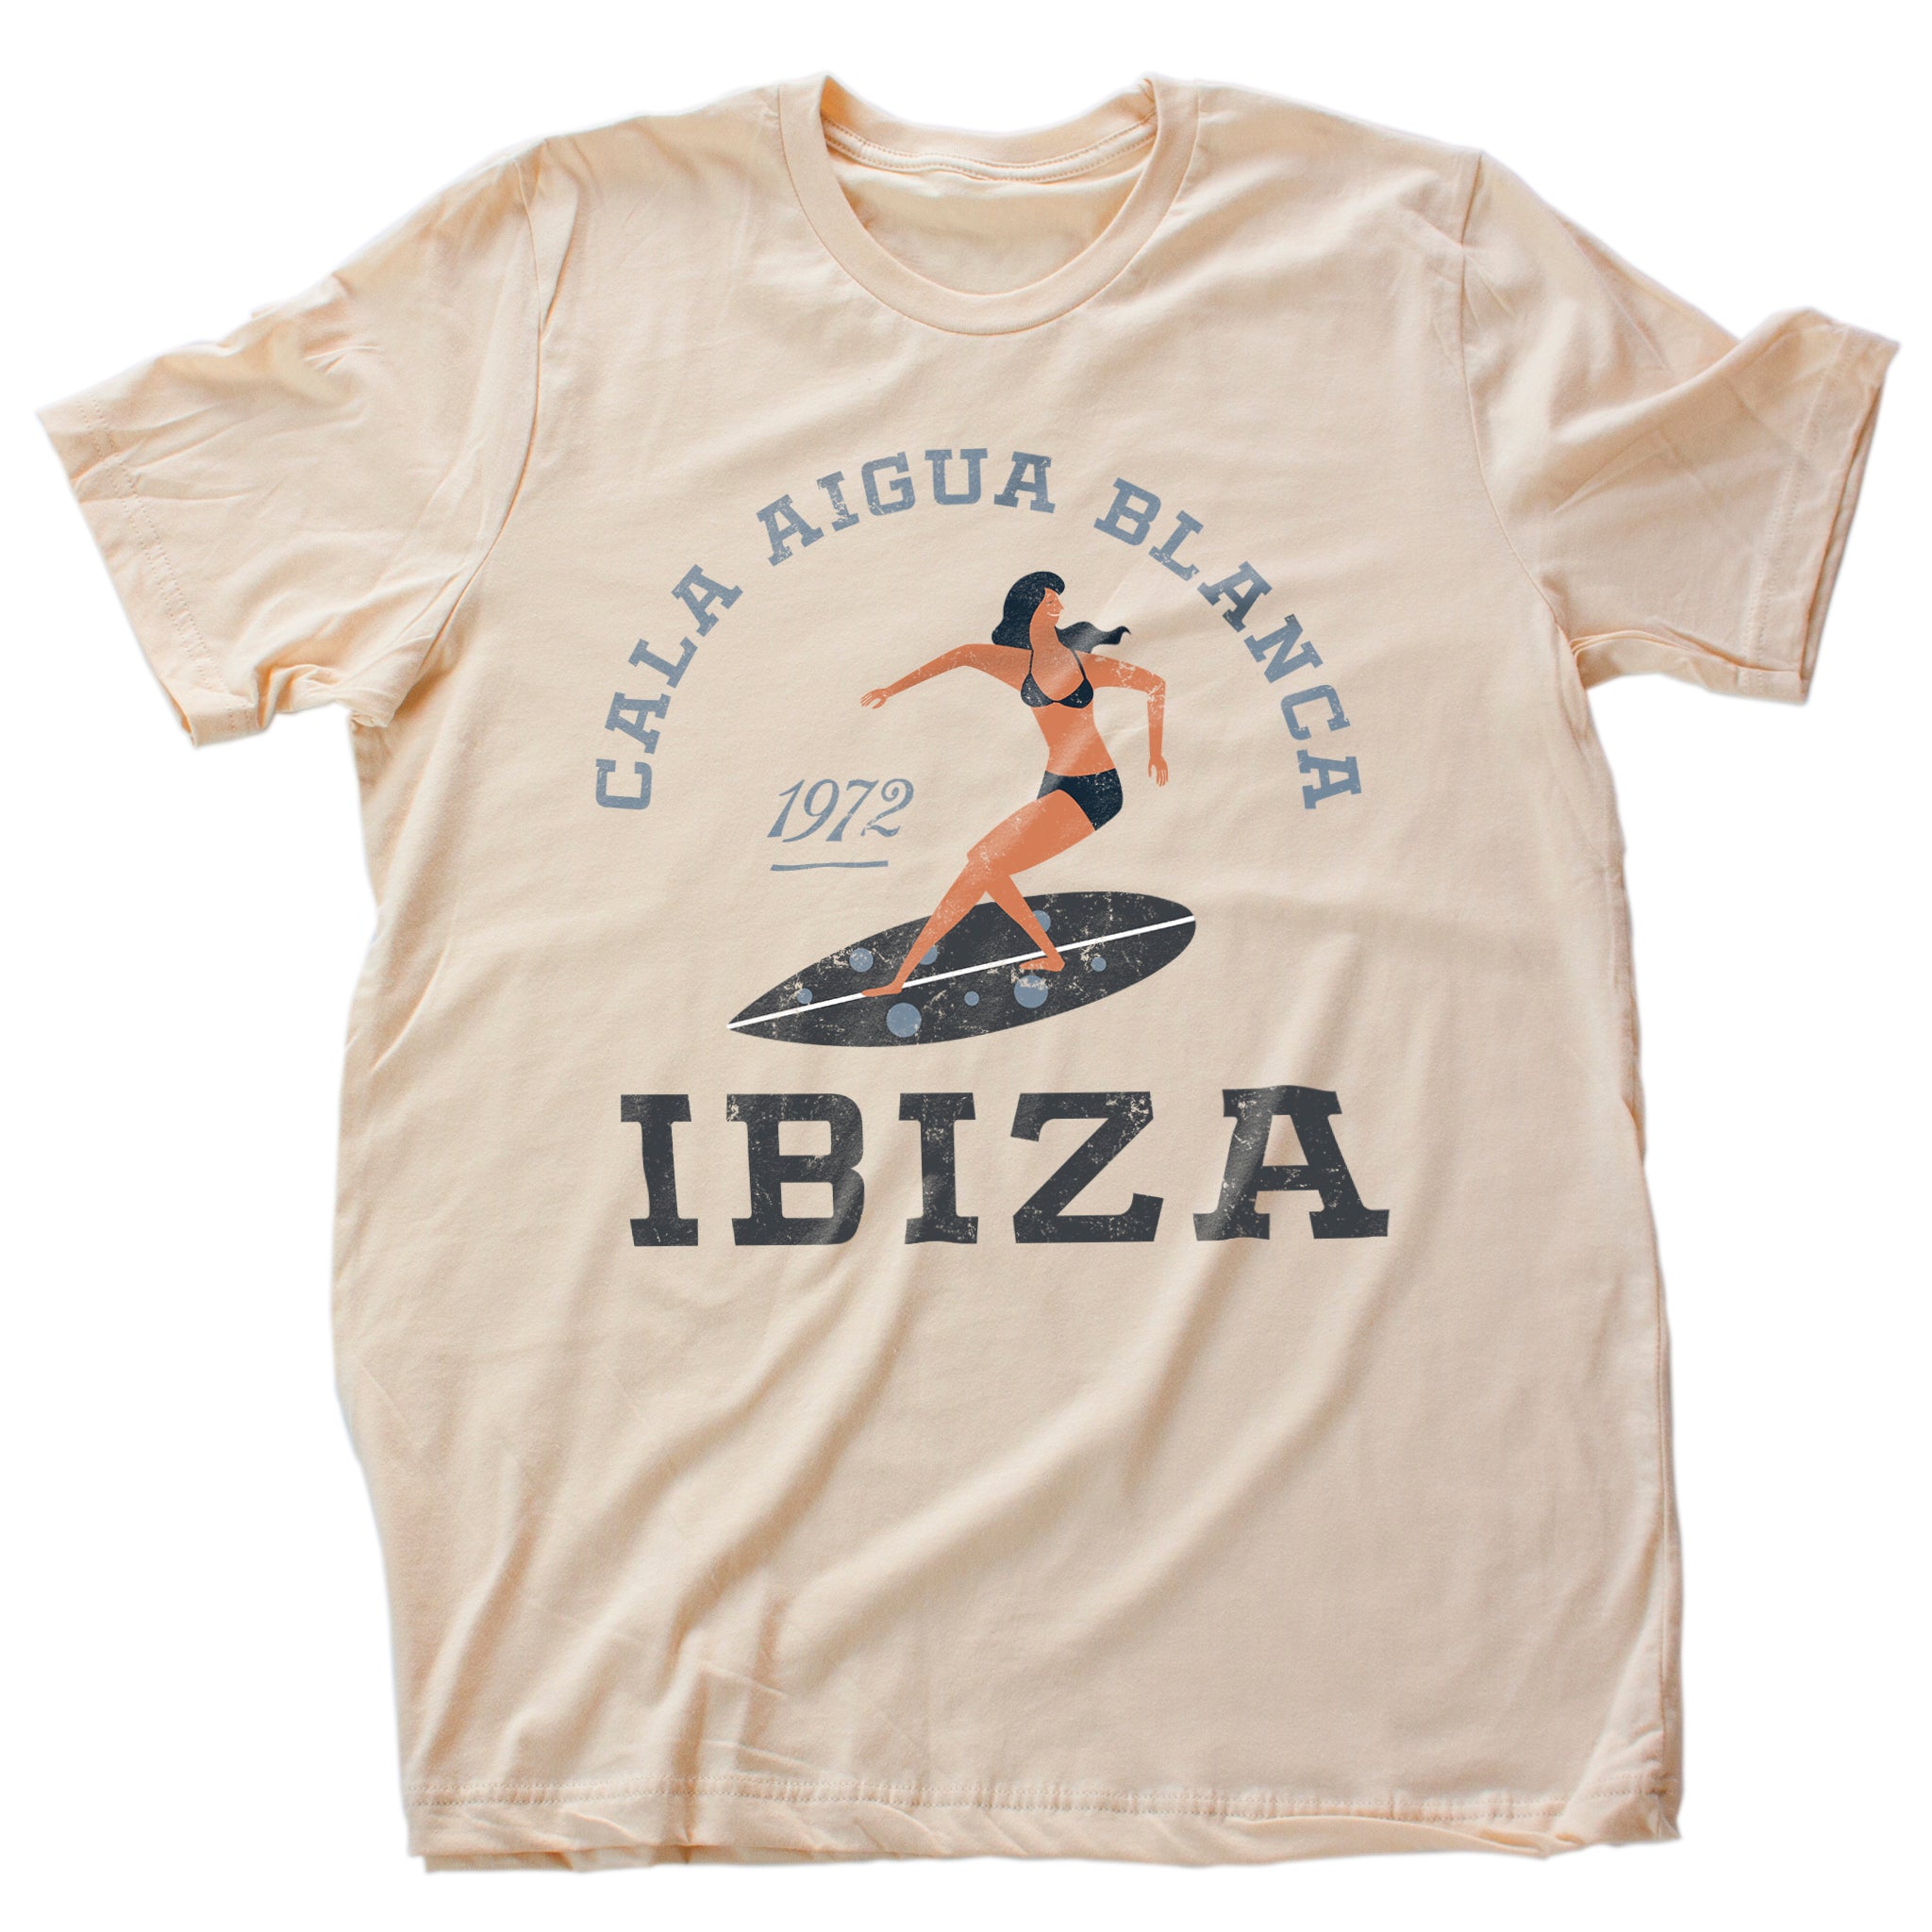 Vintage-inspired retro graphic t-shirt for the primary Ibiza Surfing destination, Cala Aigua Blanca. The shirt features a stylish illustration of a woman wearing a bikini on a surfboard.